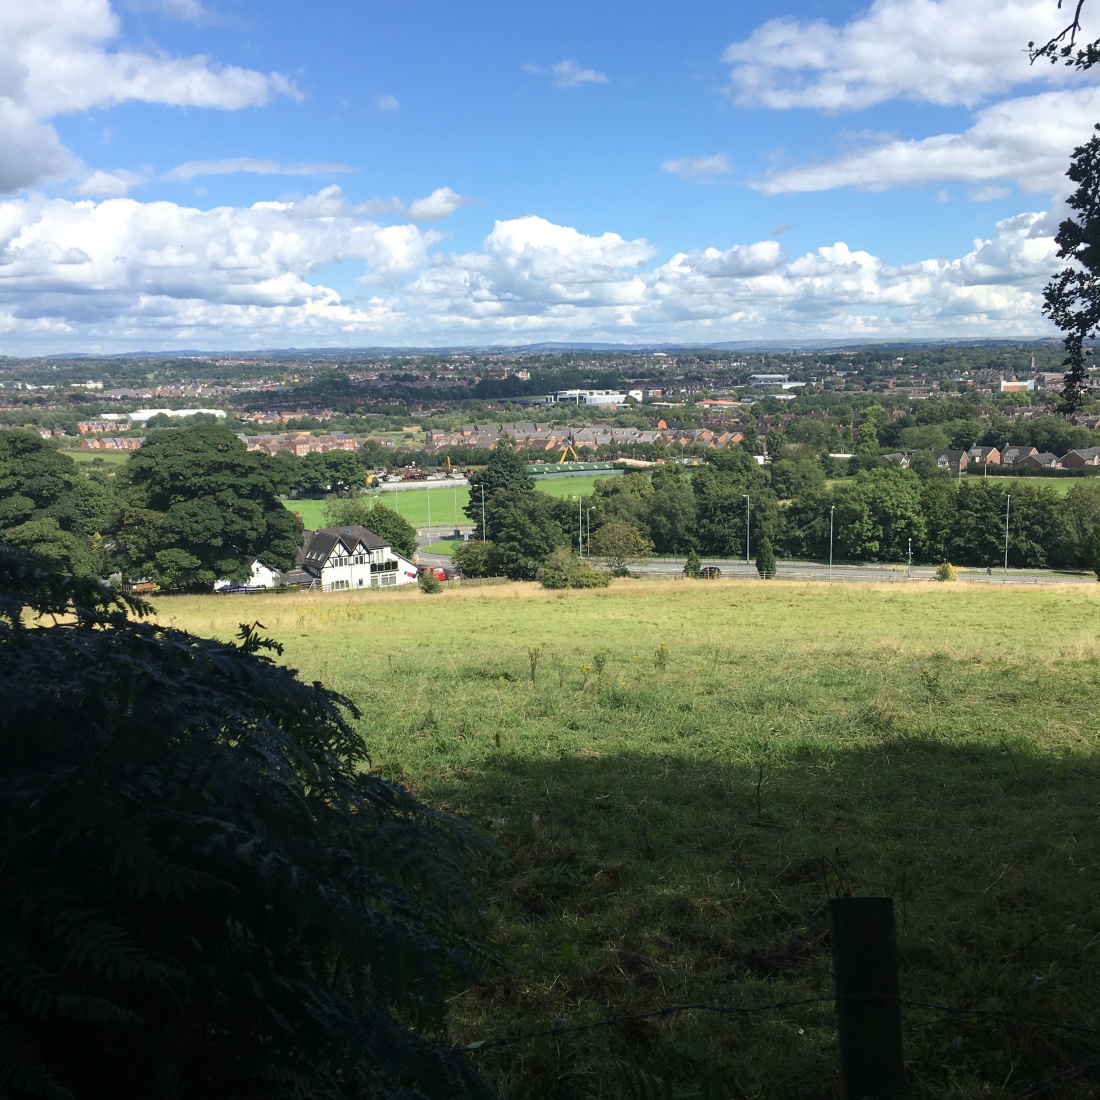 View over Newcastle under Lyme